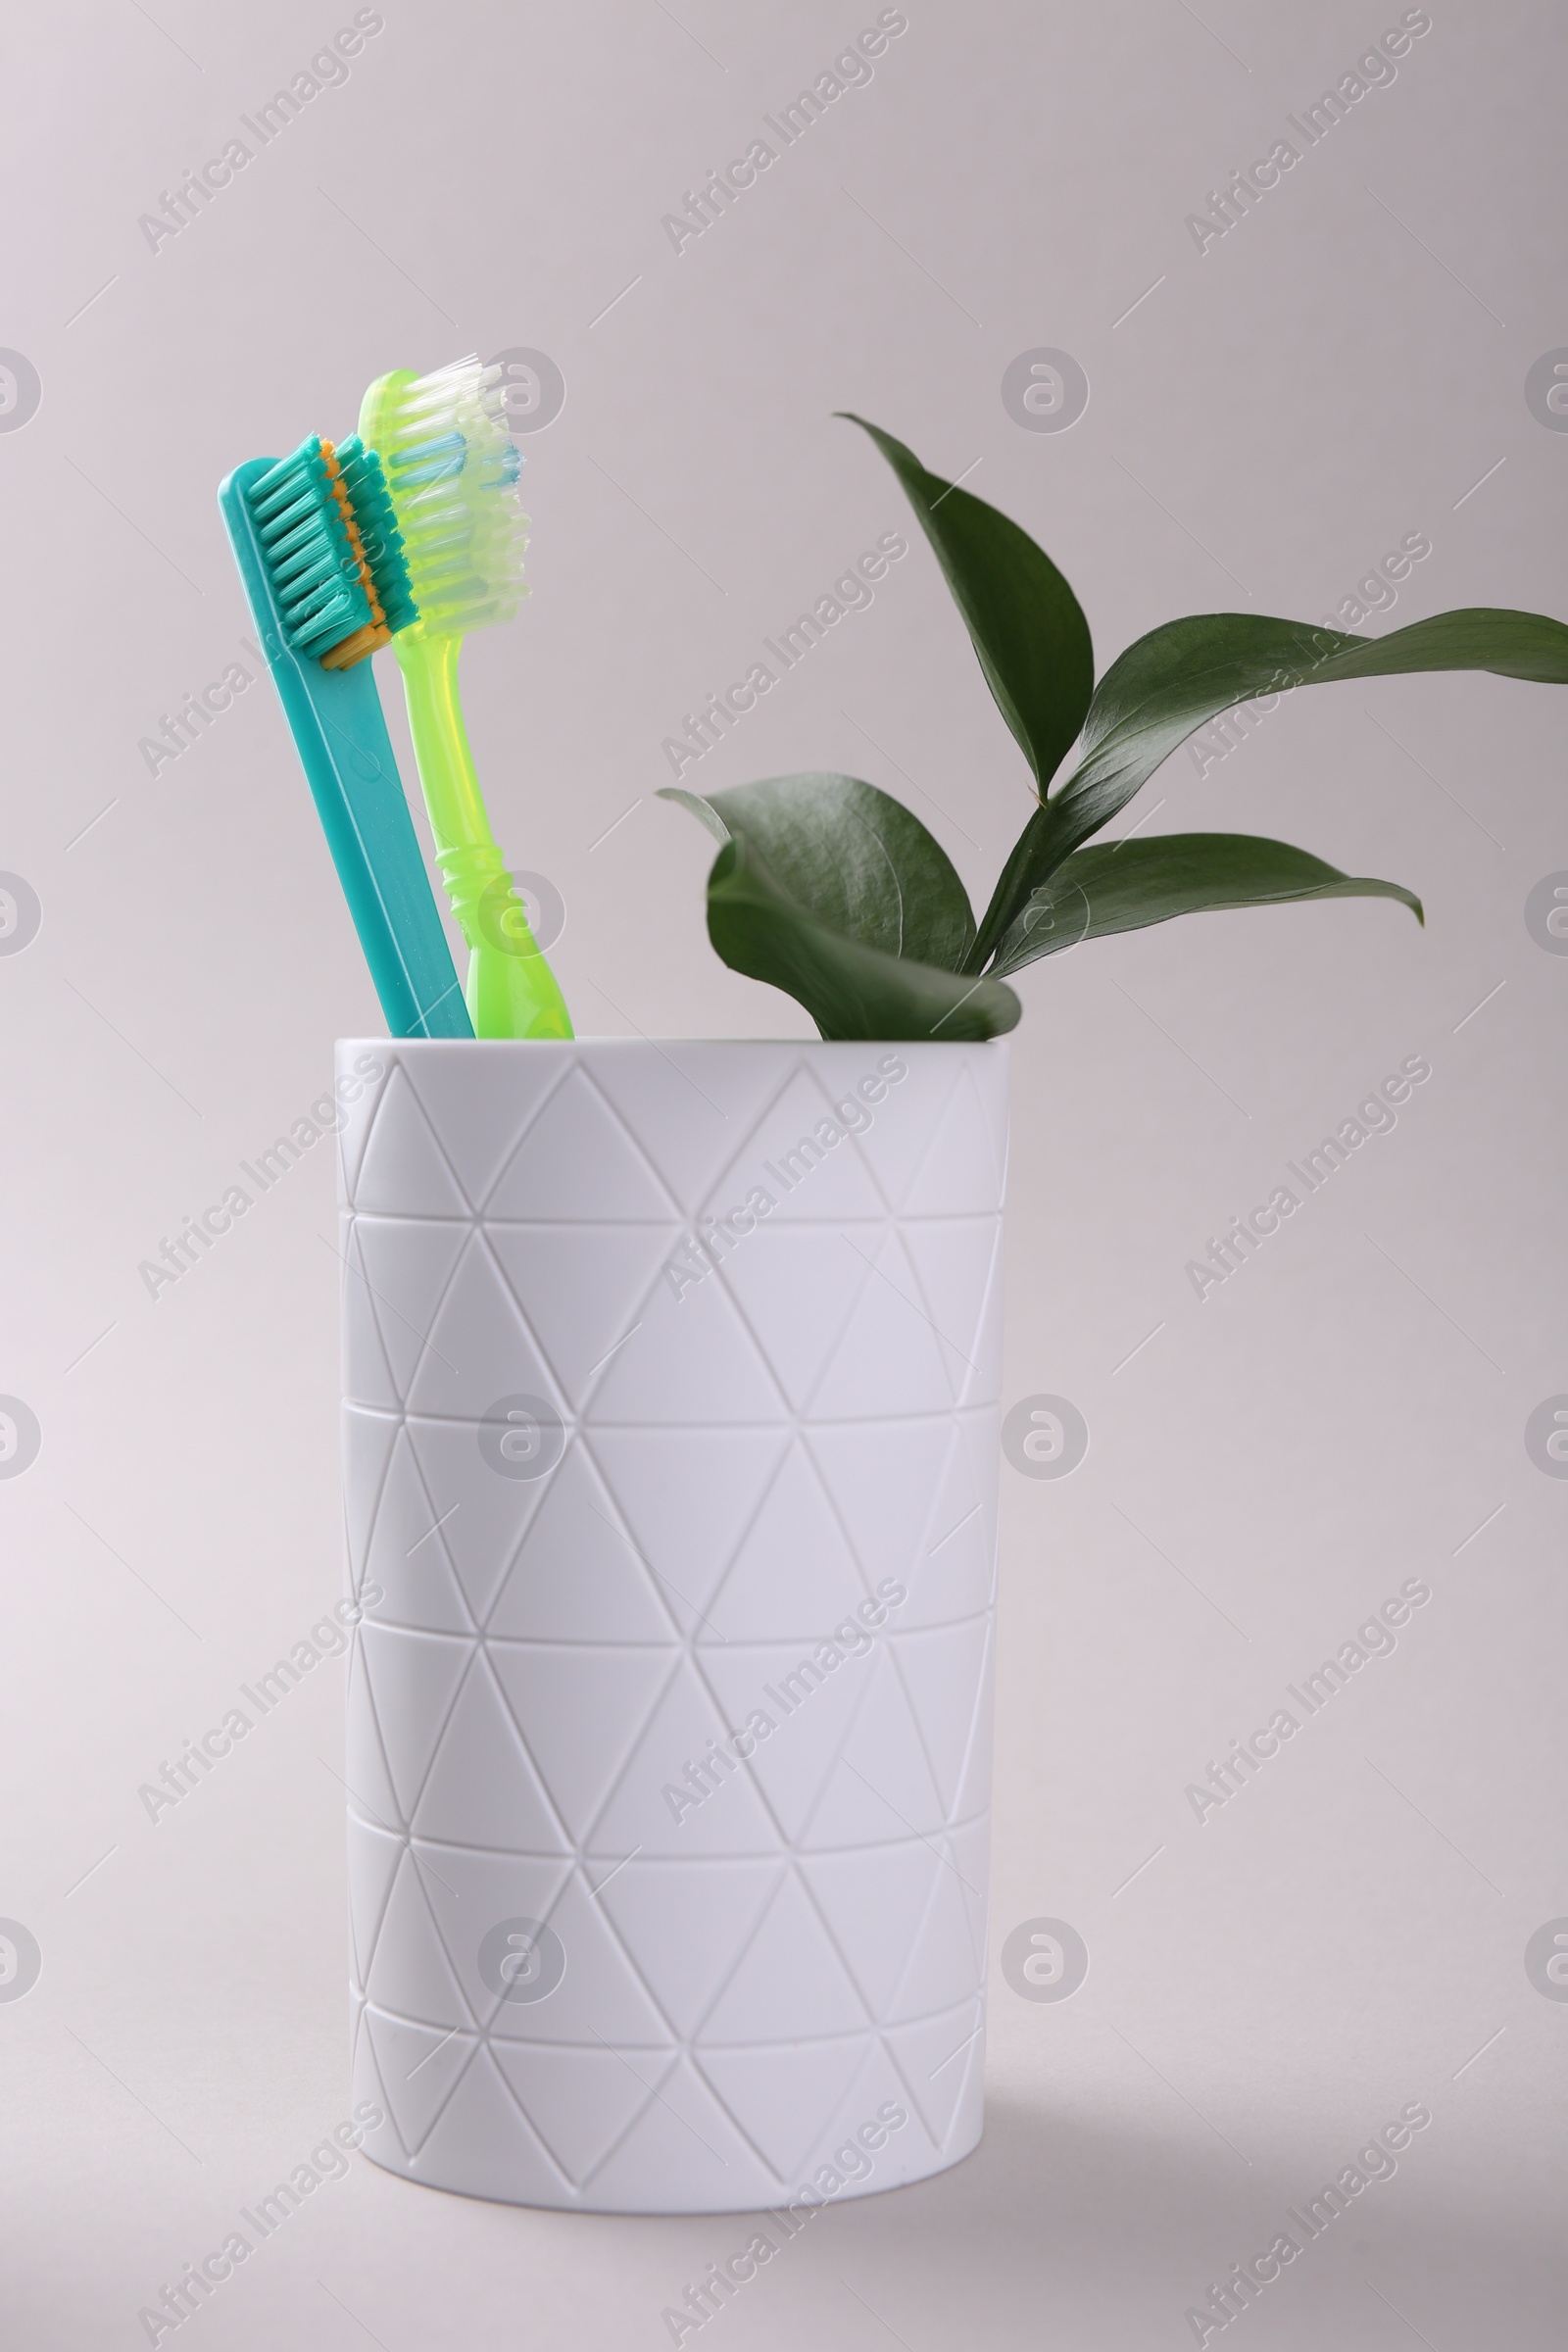 Photo of Colorful plastic toothbrushes and plant twig in container on light background